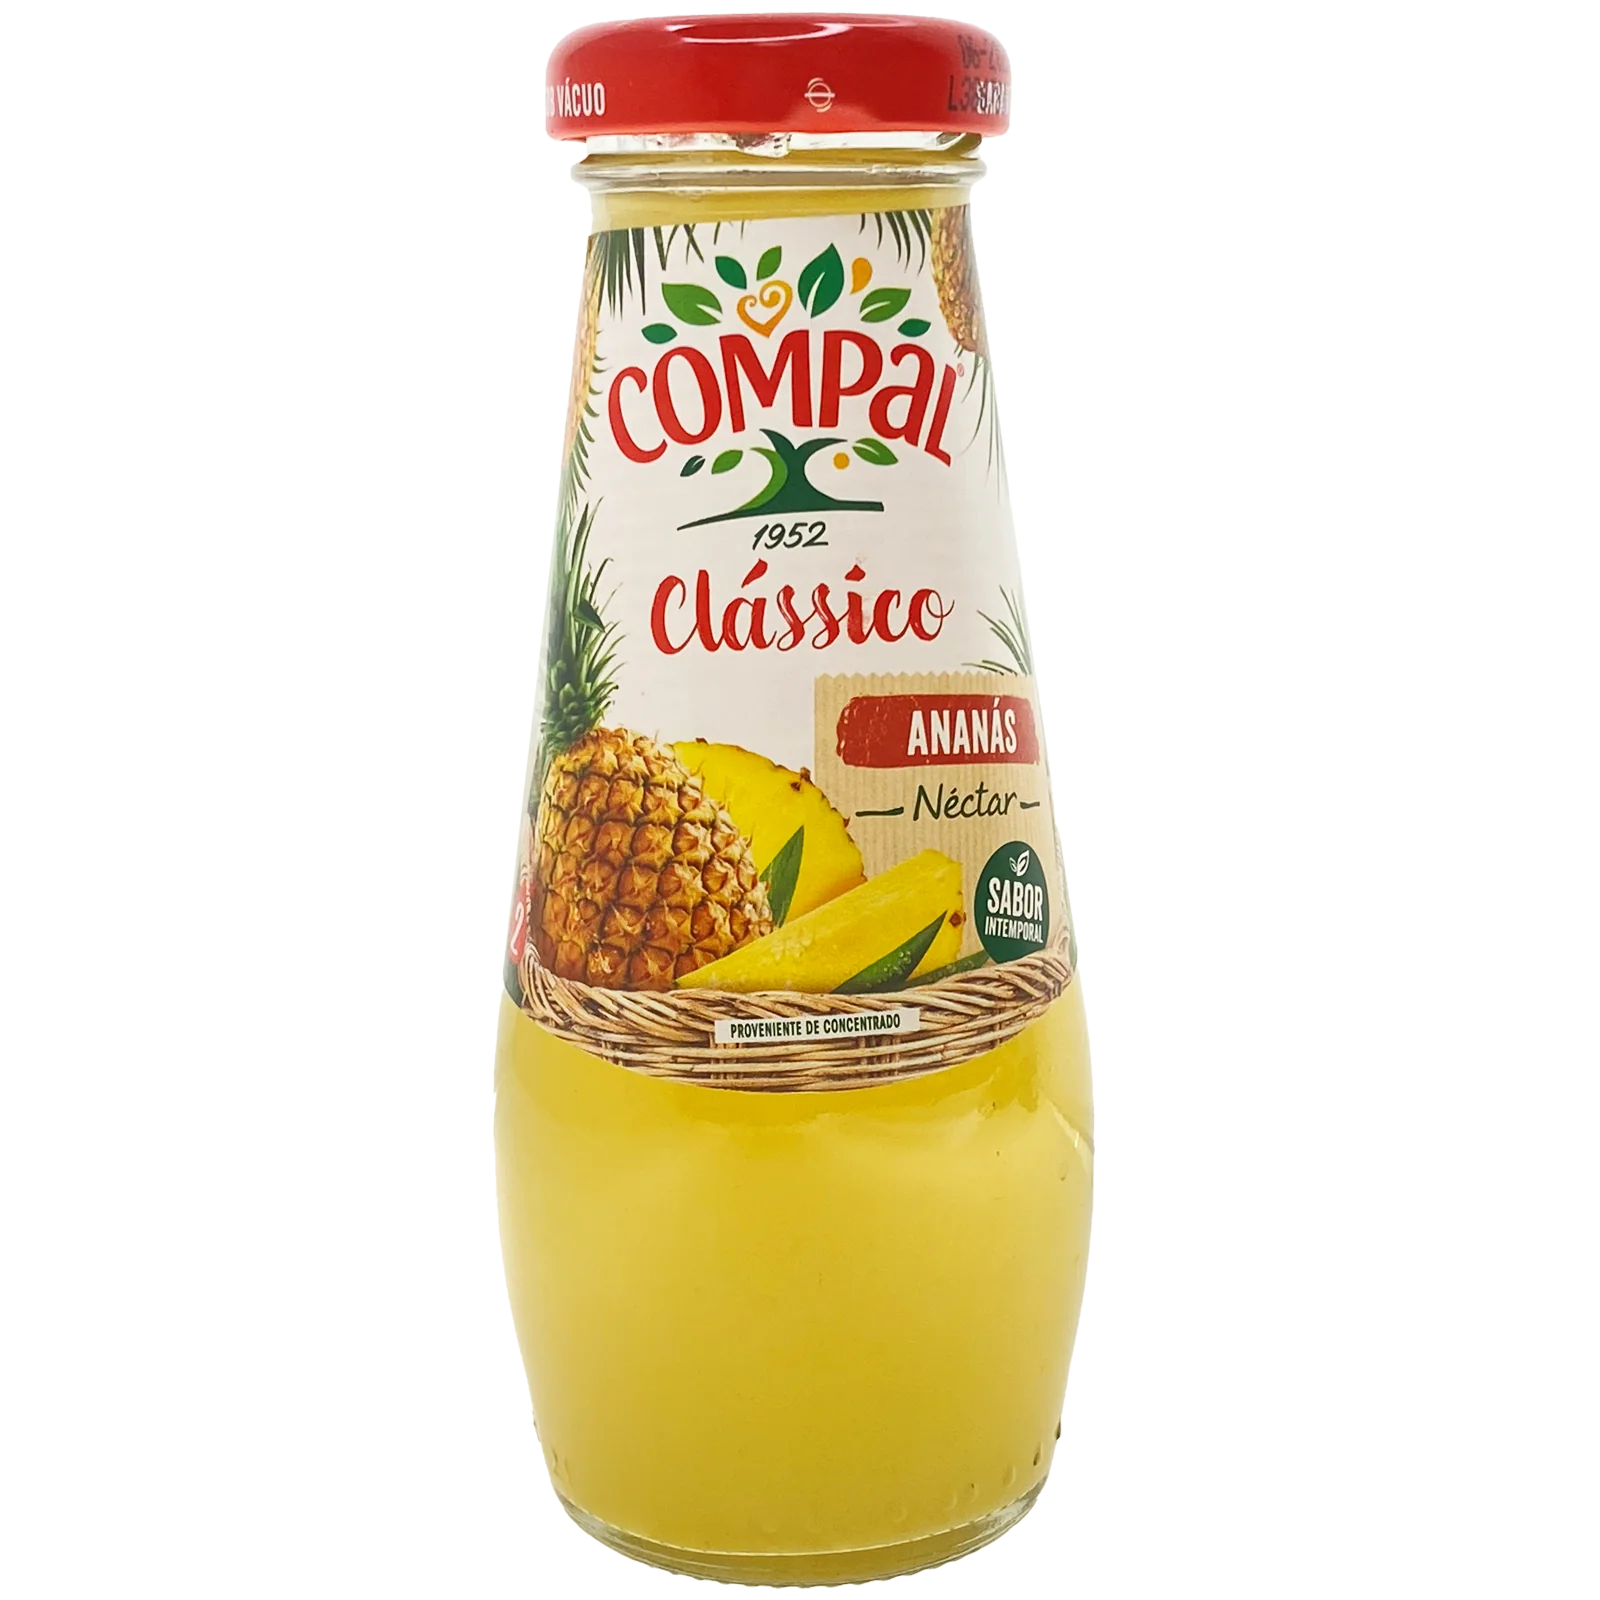 Suco Abacaxi Compal (200ml) unidade - Compal Pineapple Juice (200ml) unit